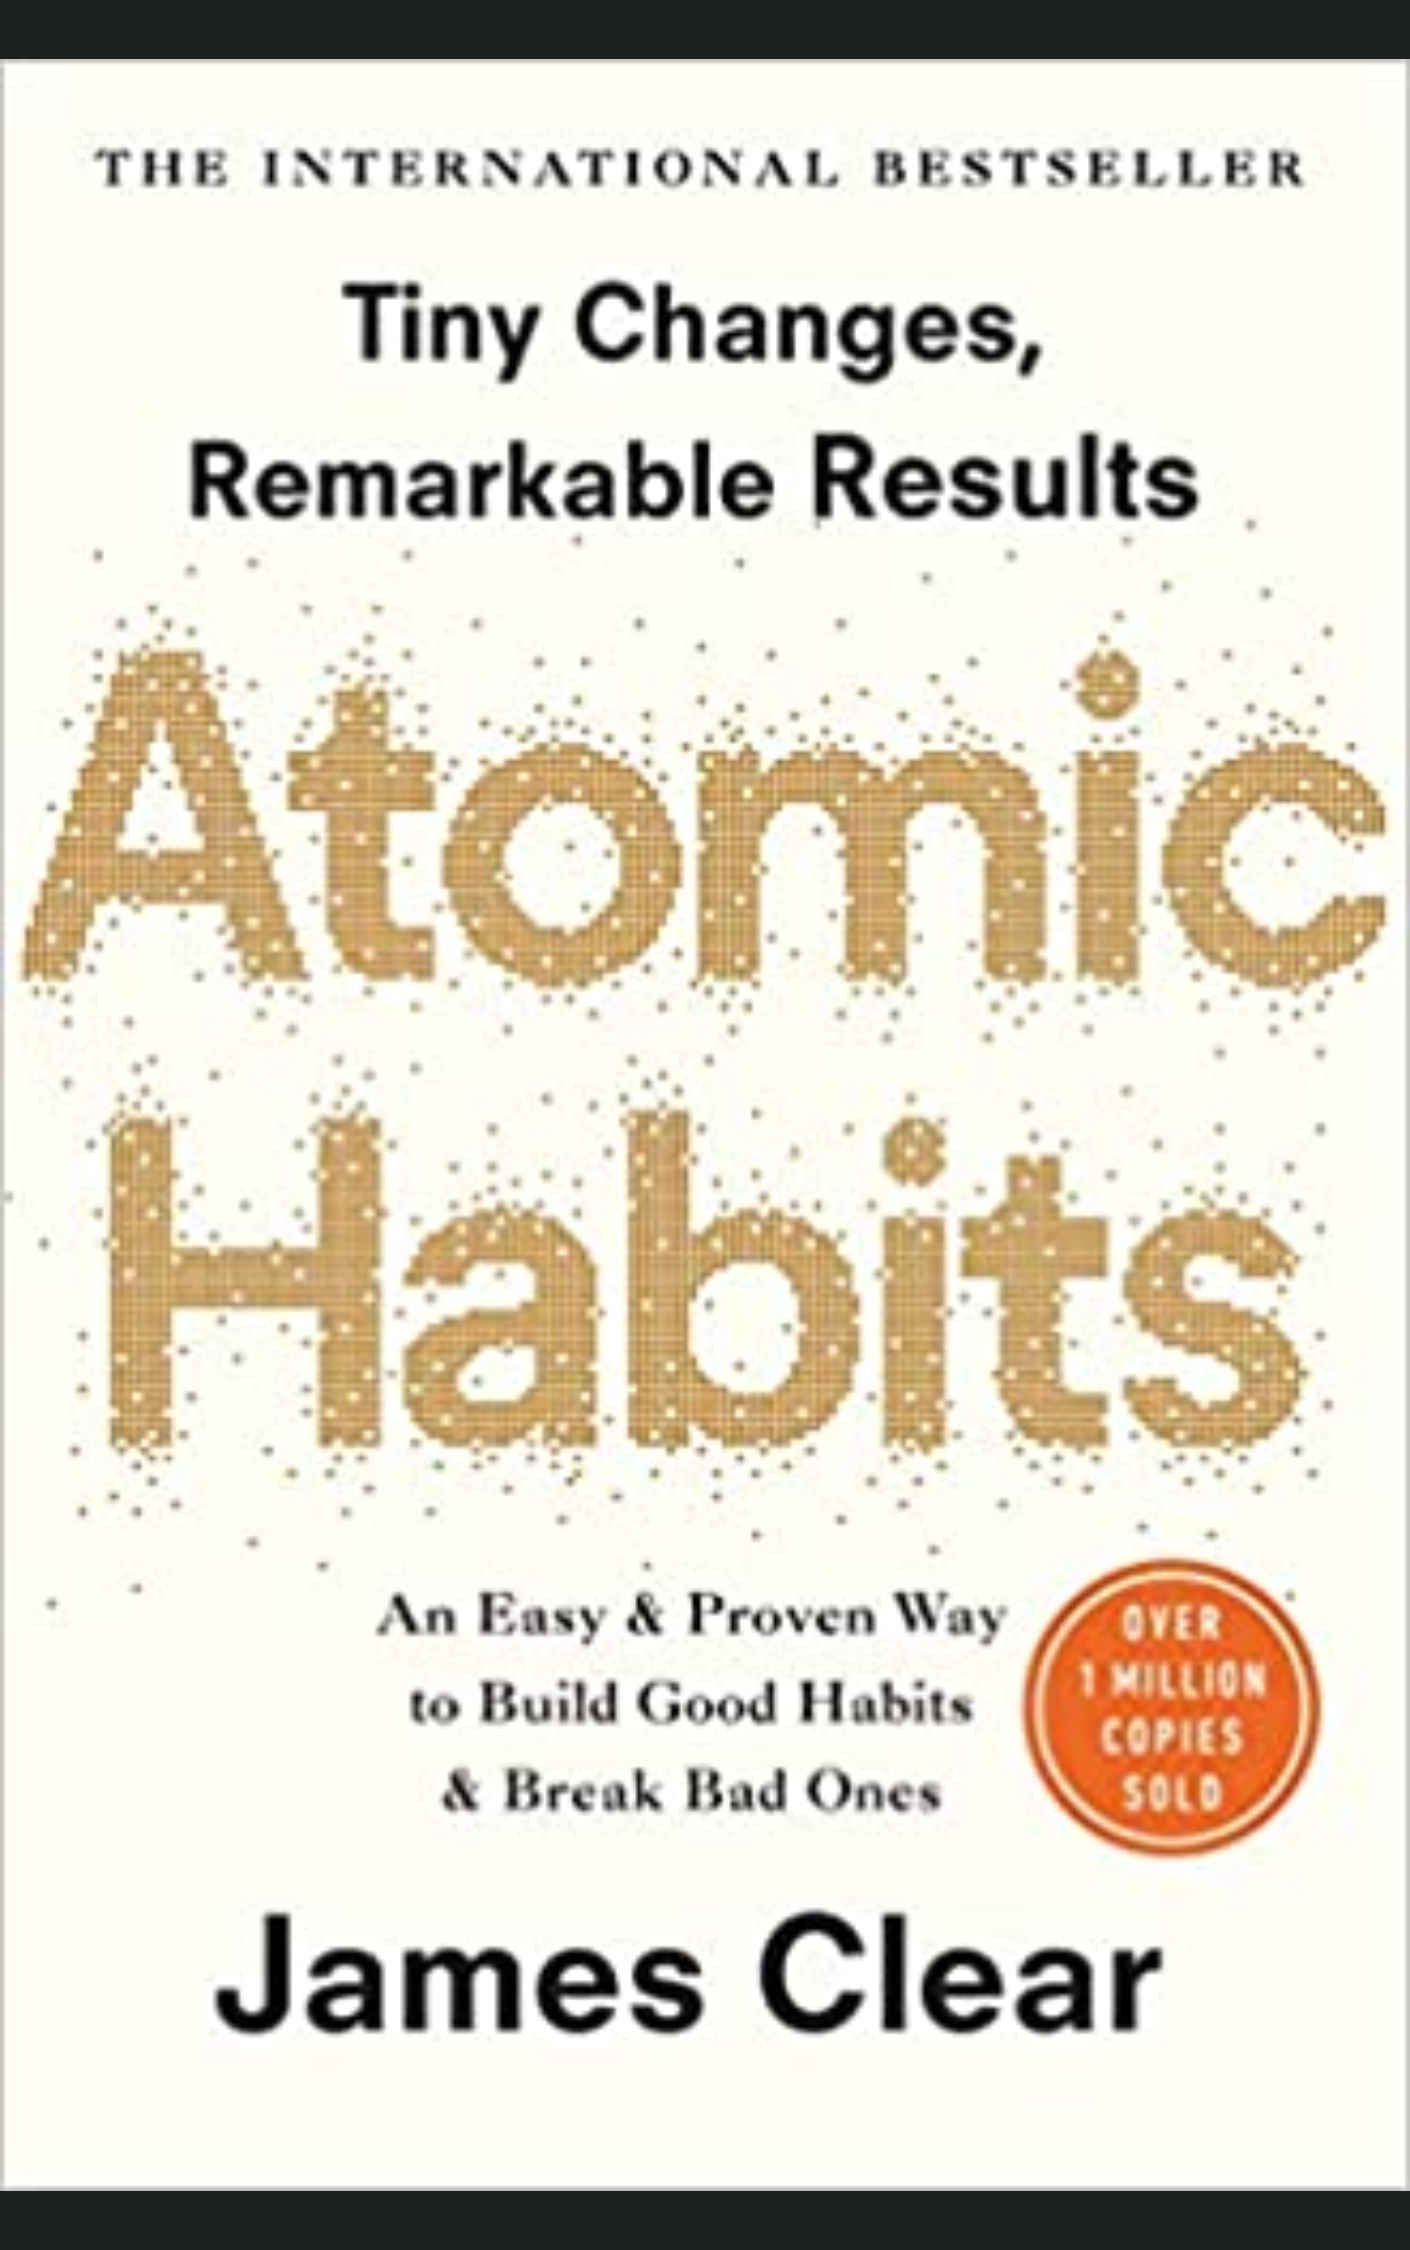 ATOMIC HABITS by JAMES CLEAR